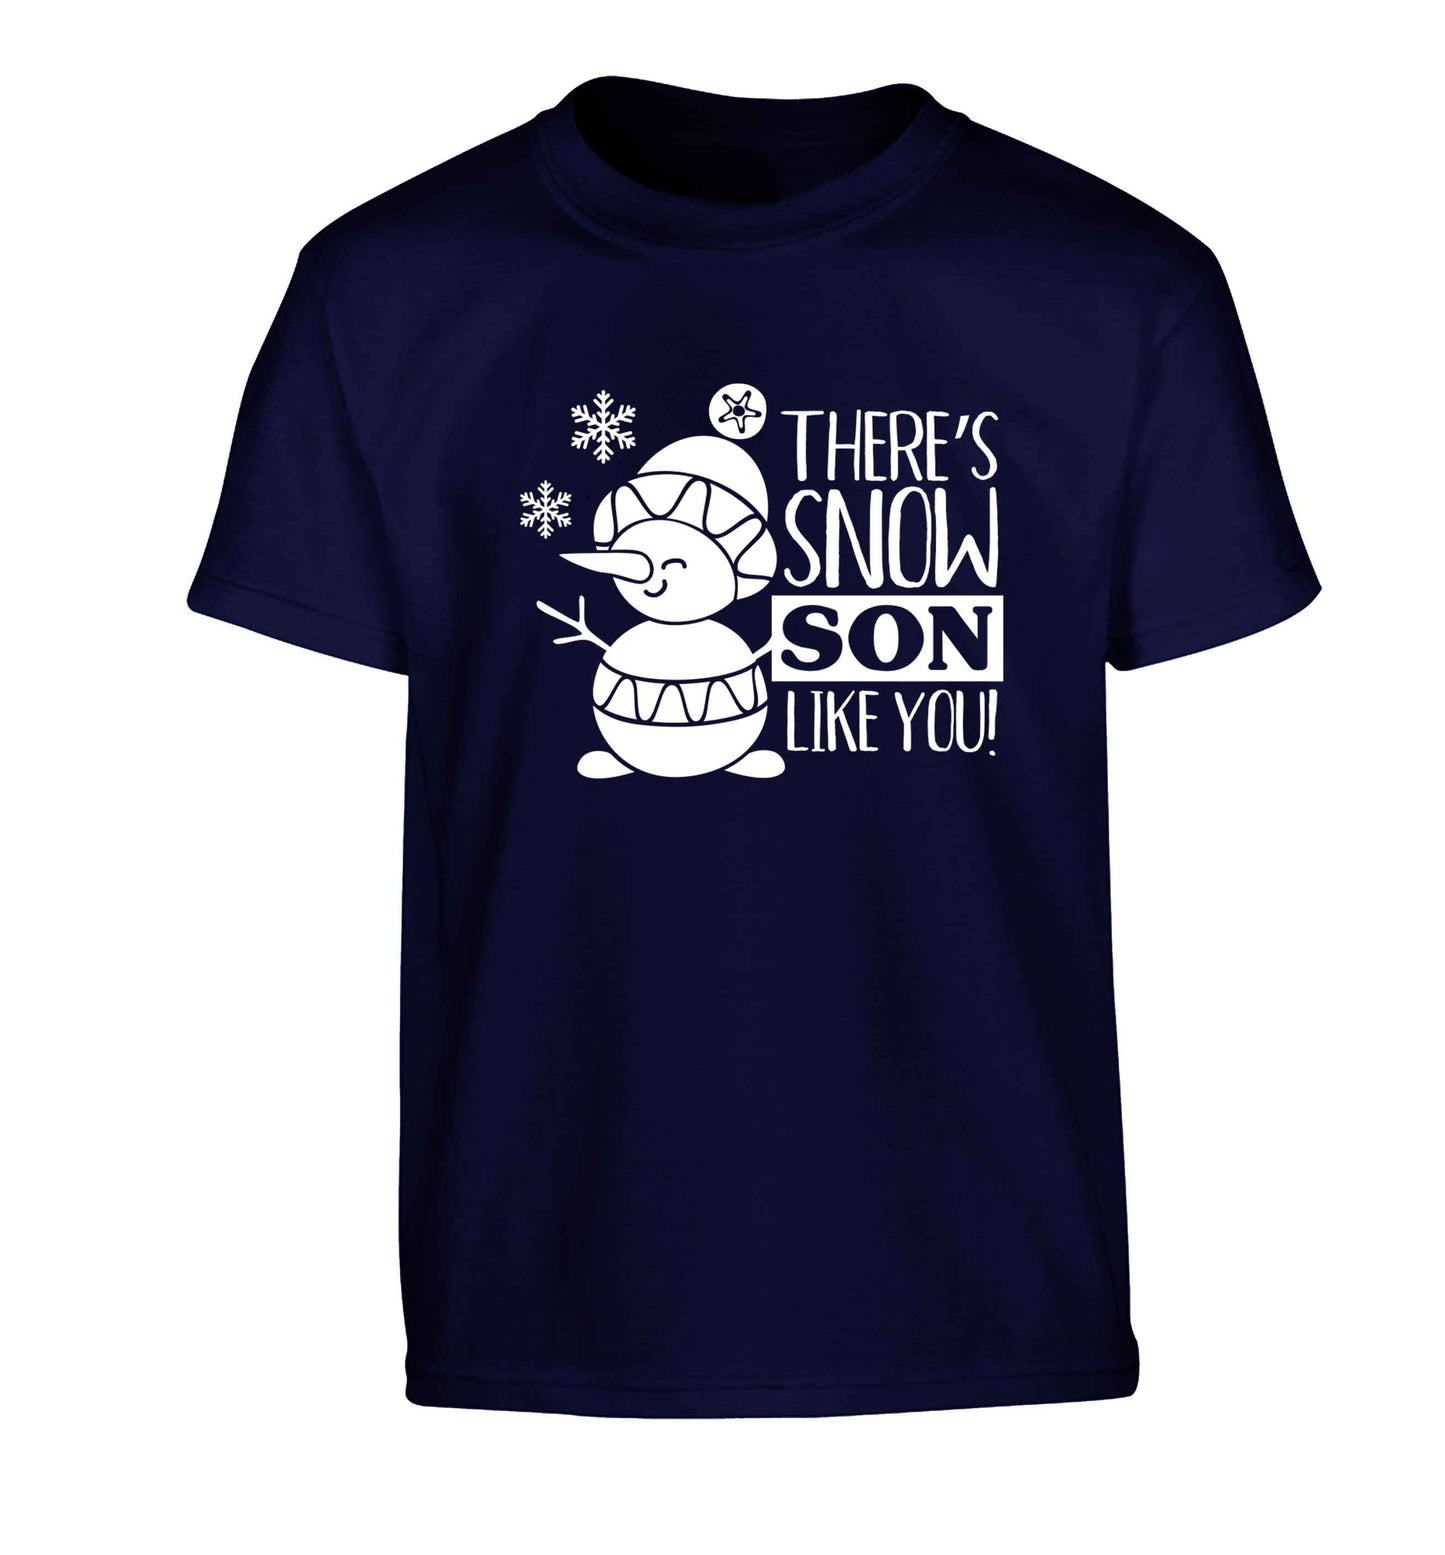 There's snow son like you Children's navy Tshirt 12-13 Years